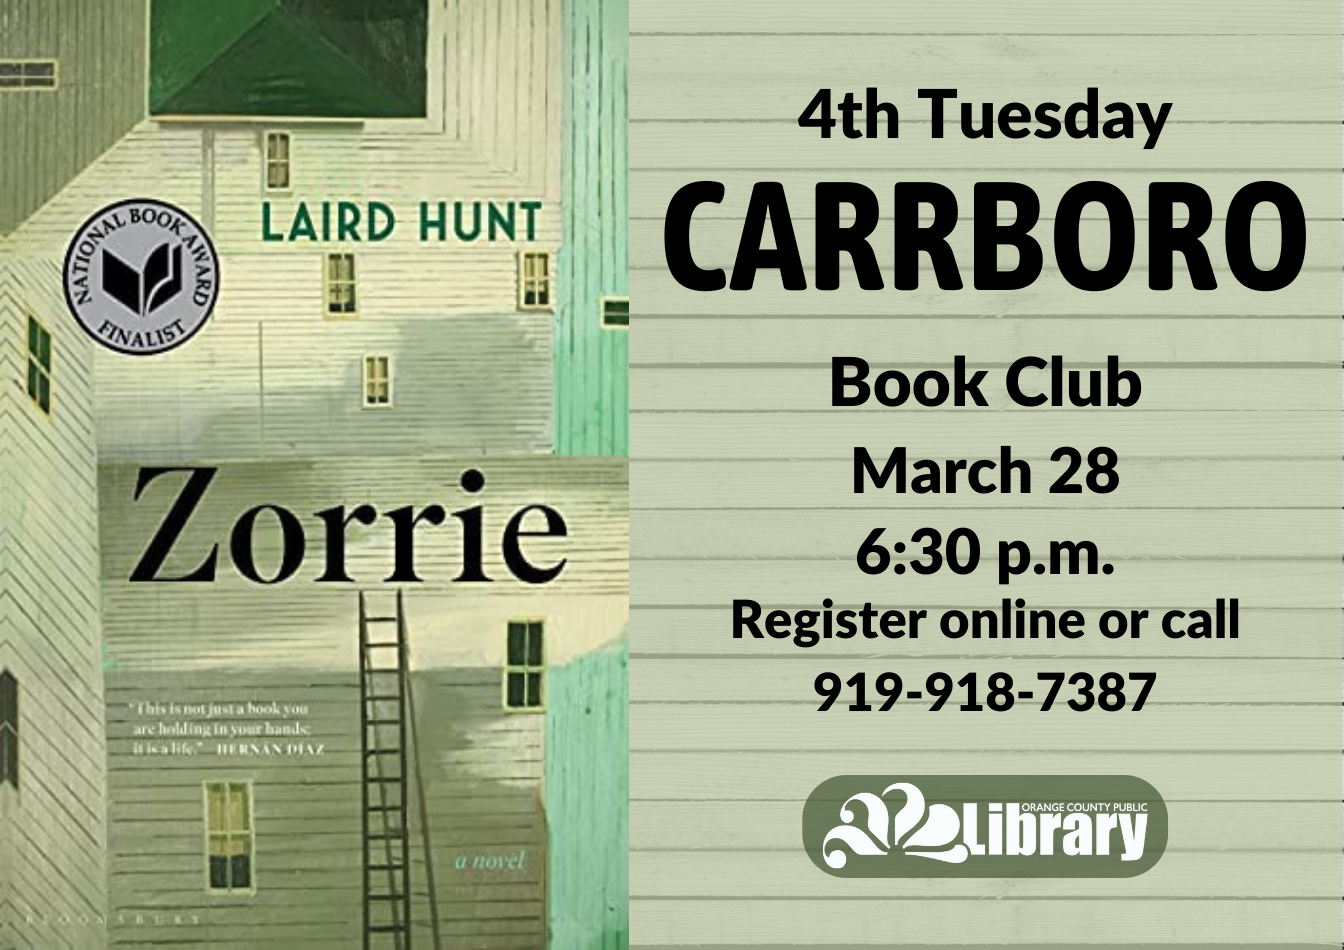 A green flyer with the cover of this month's book, Zorrie by Laird Hunt. The cover features an image of a house from the back. Text: Fourth Tuesday Carrboro Book Club. March 28, 6:30 PM. Register online or call 919-918-7387.